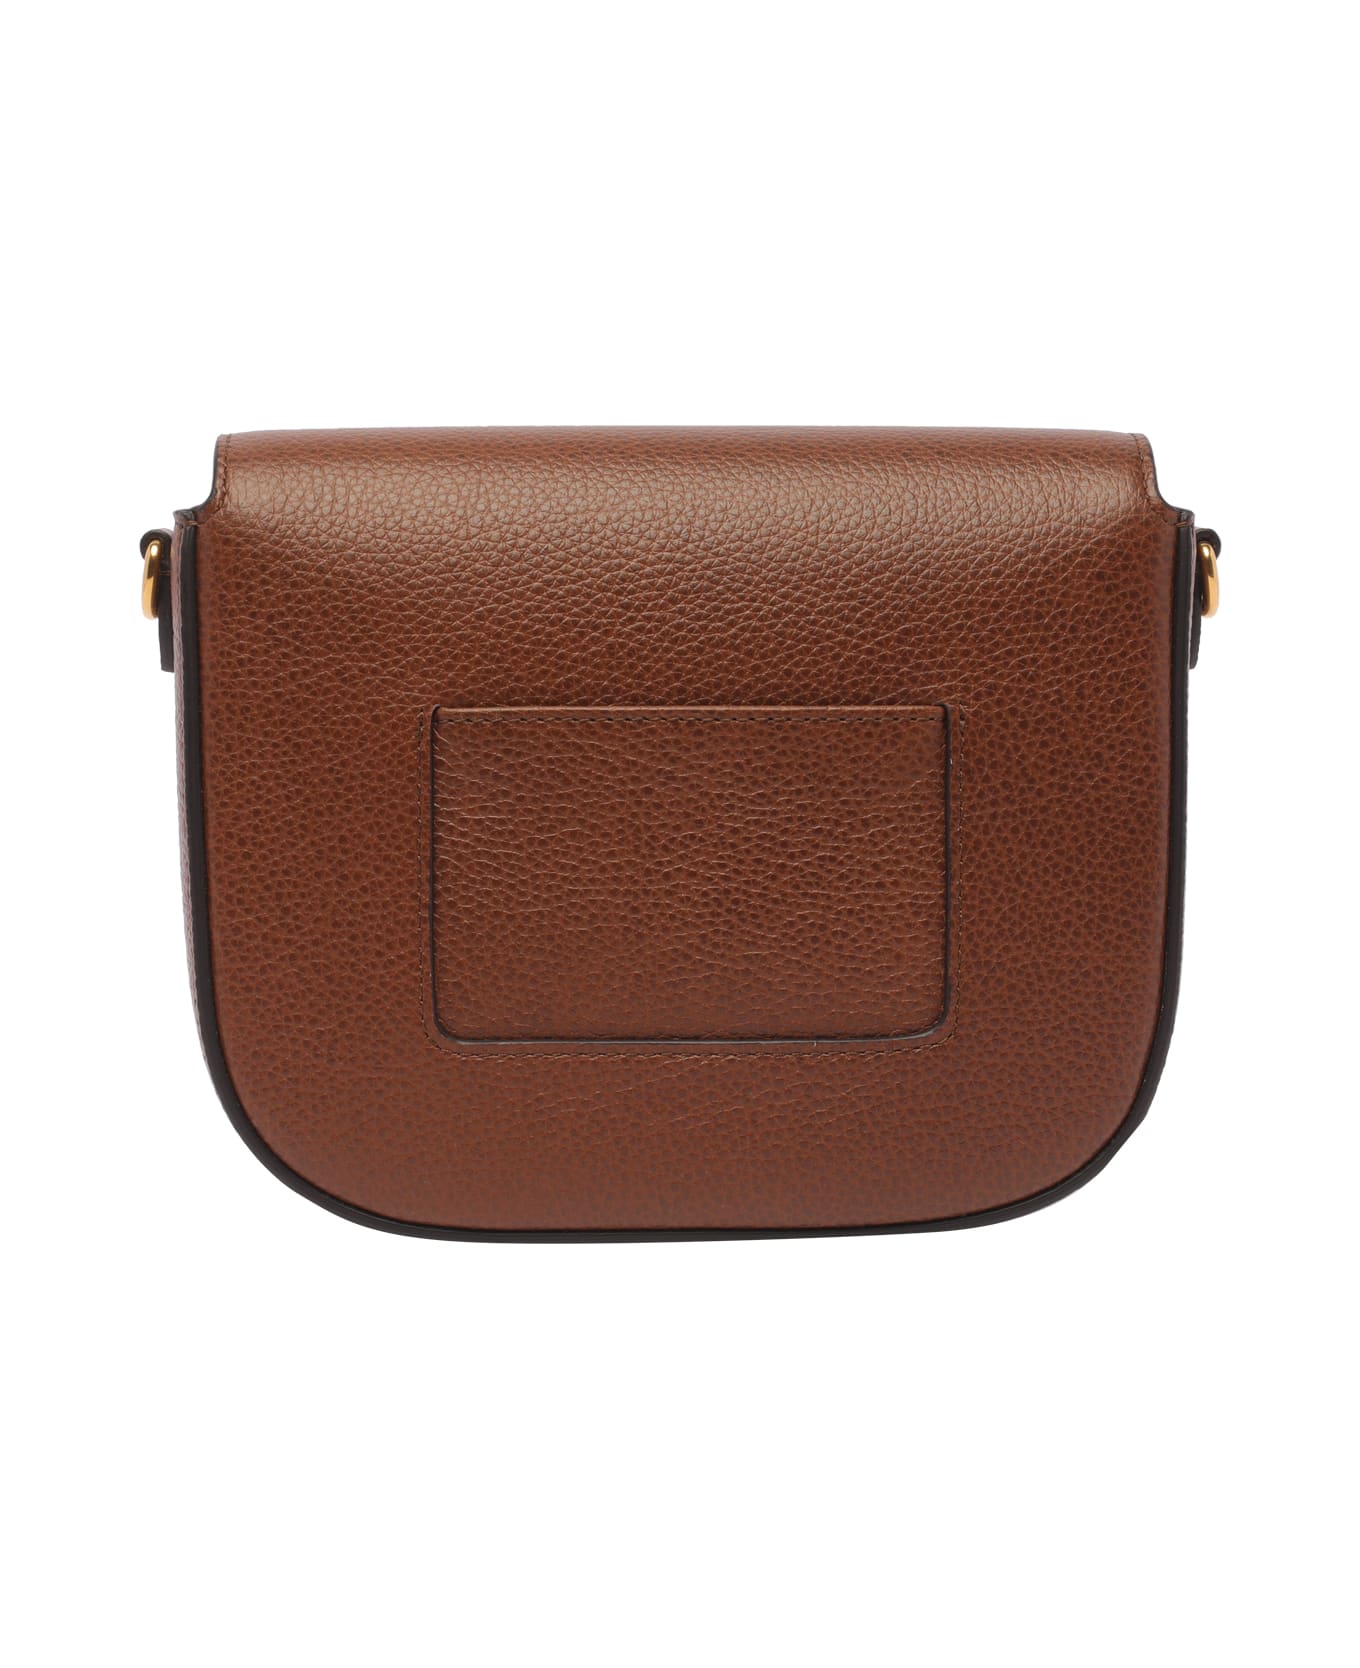 Mulberry Small Darley Satchel Two Tone - Brown